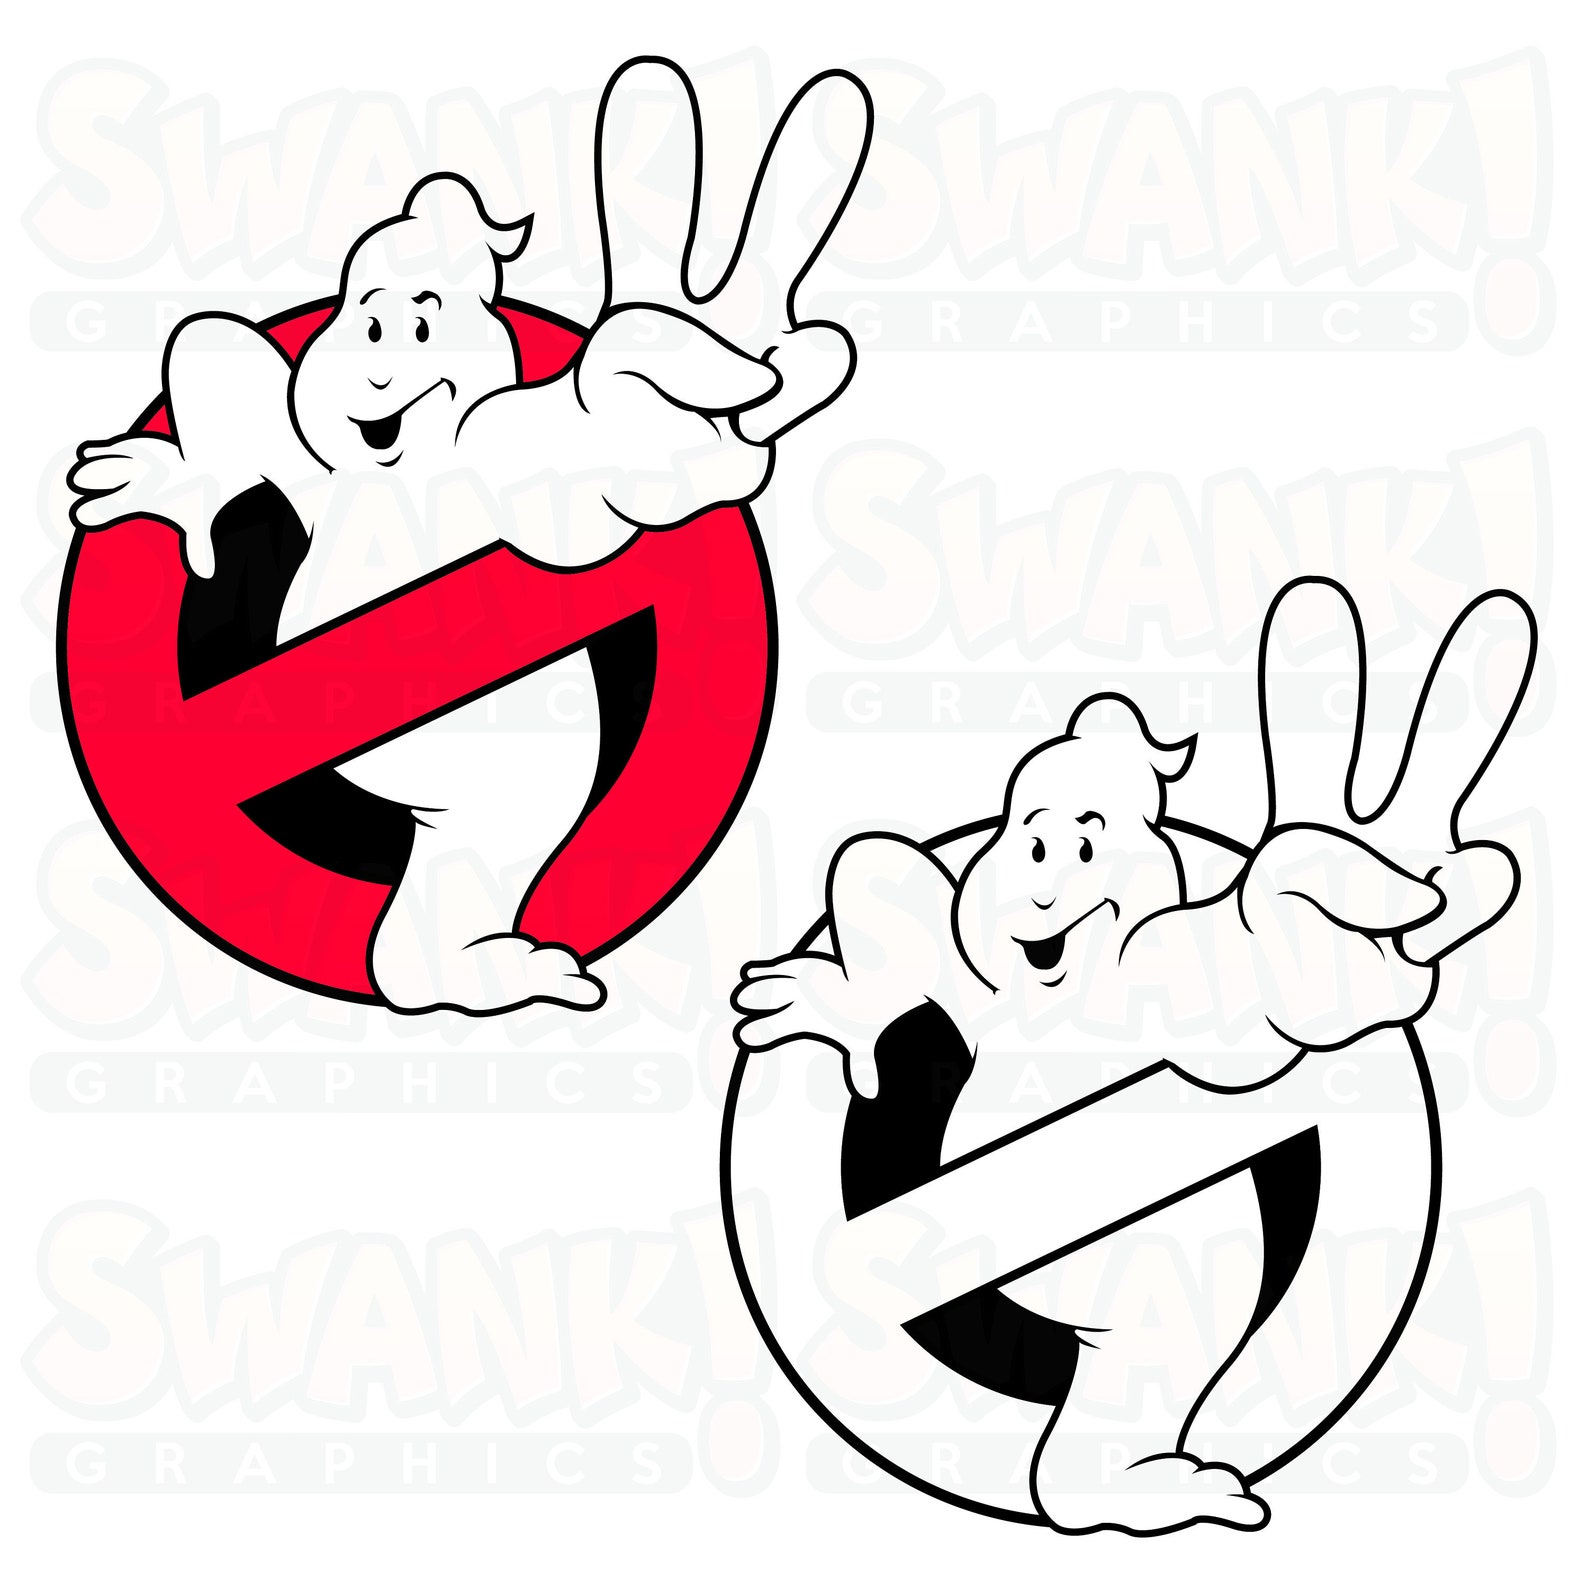 ghostbusters-logo-black-and-white